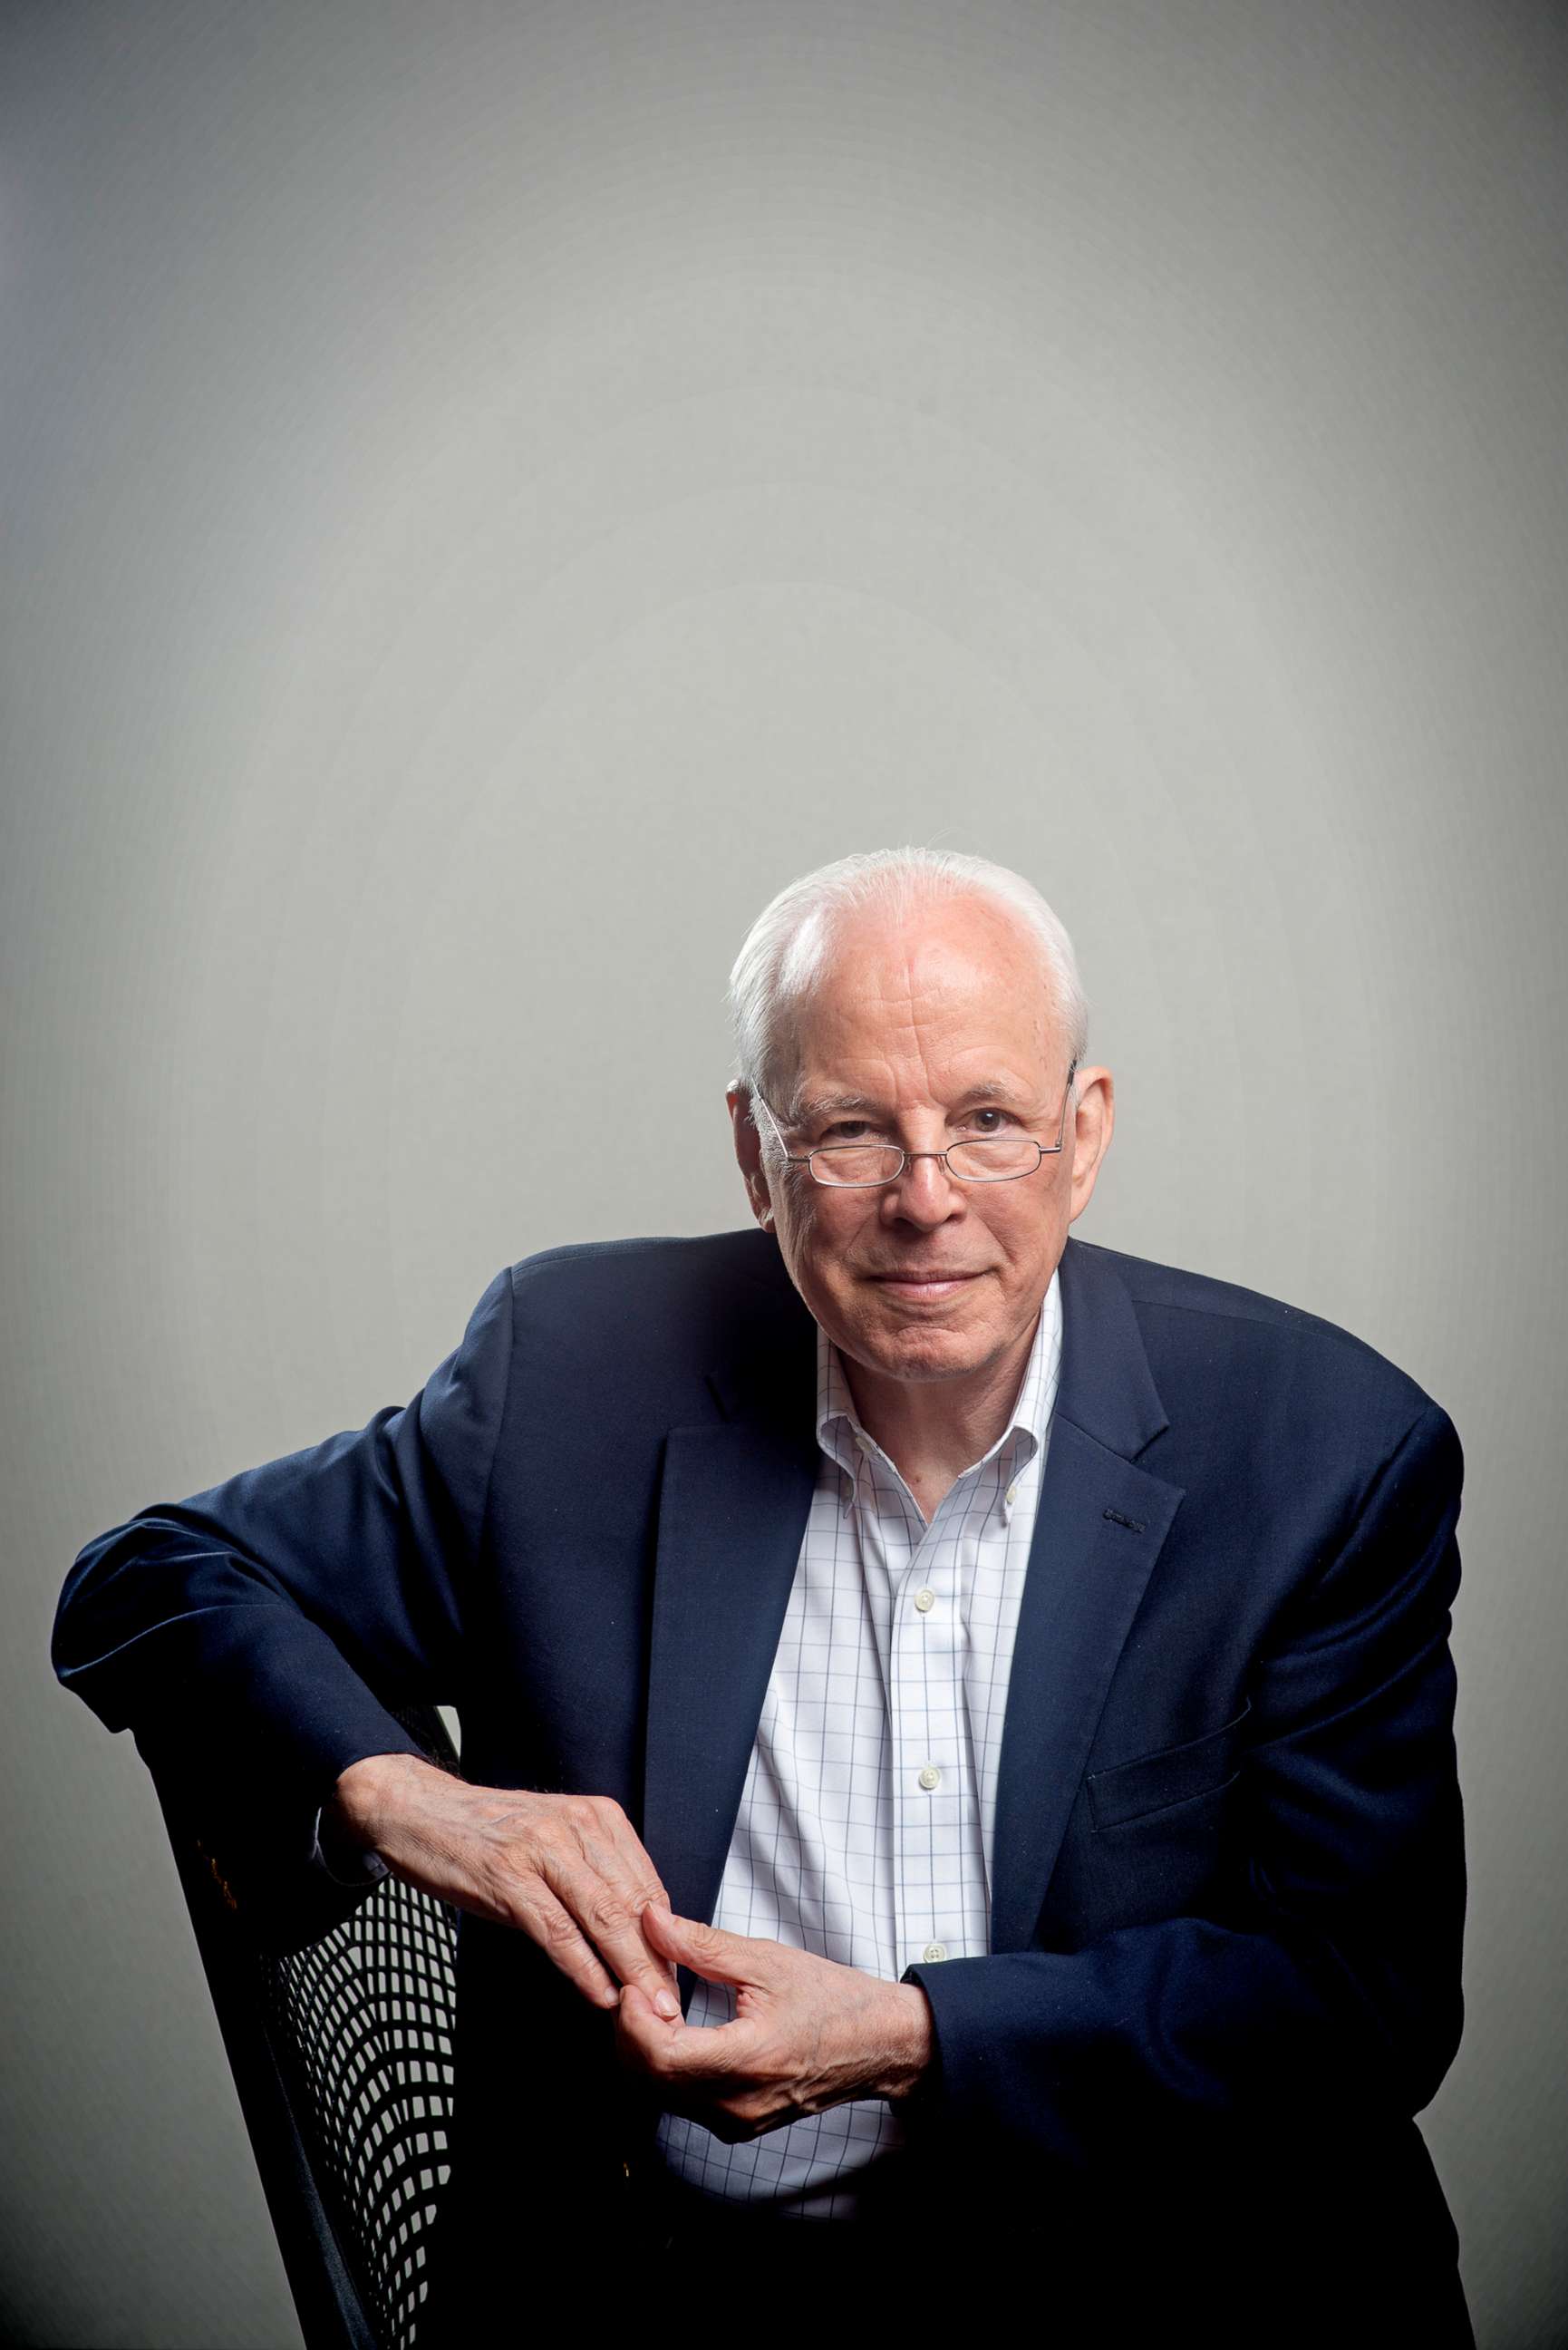 PHOTO: Former White House counsel John Dean poses for a portrait in Washington, July 24, 2014.